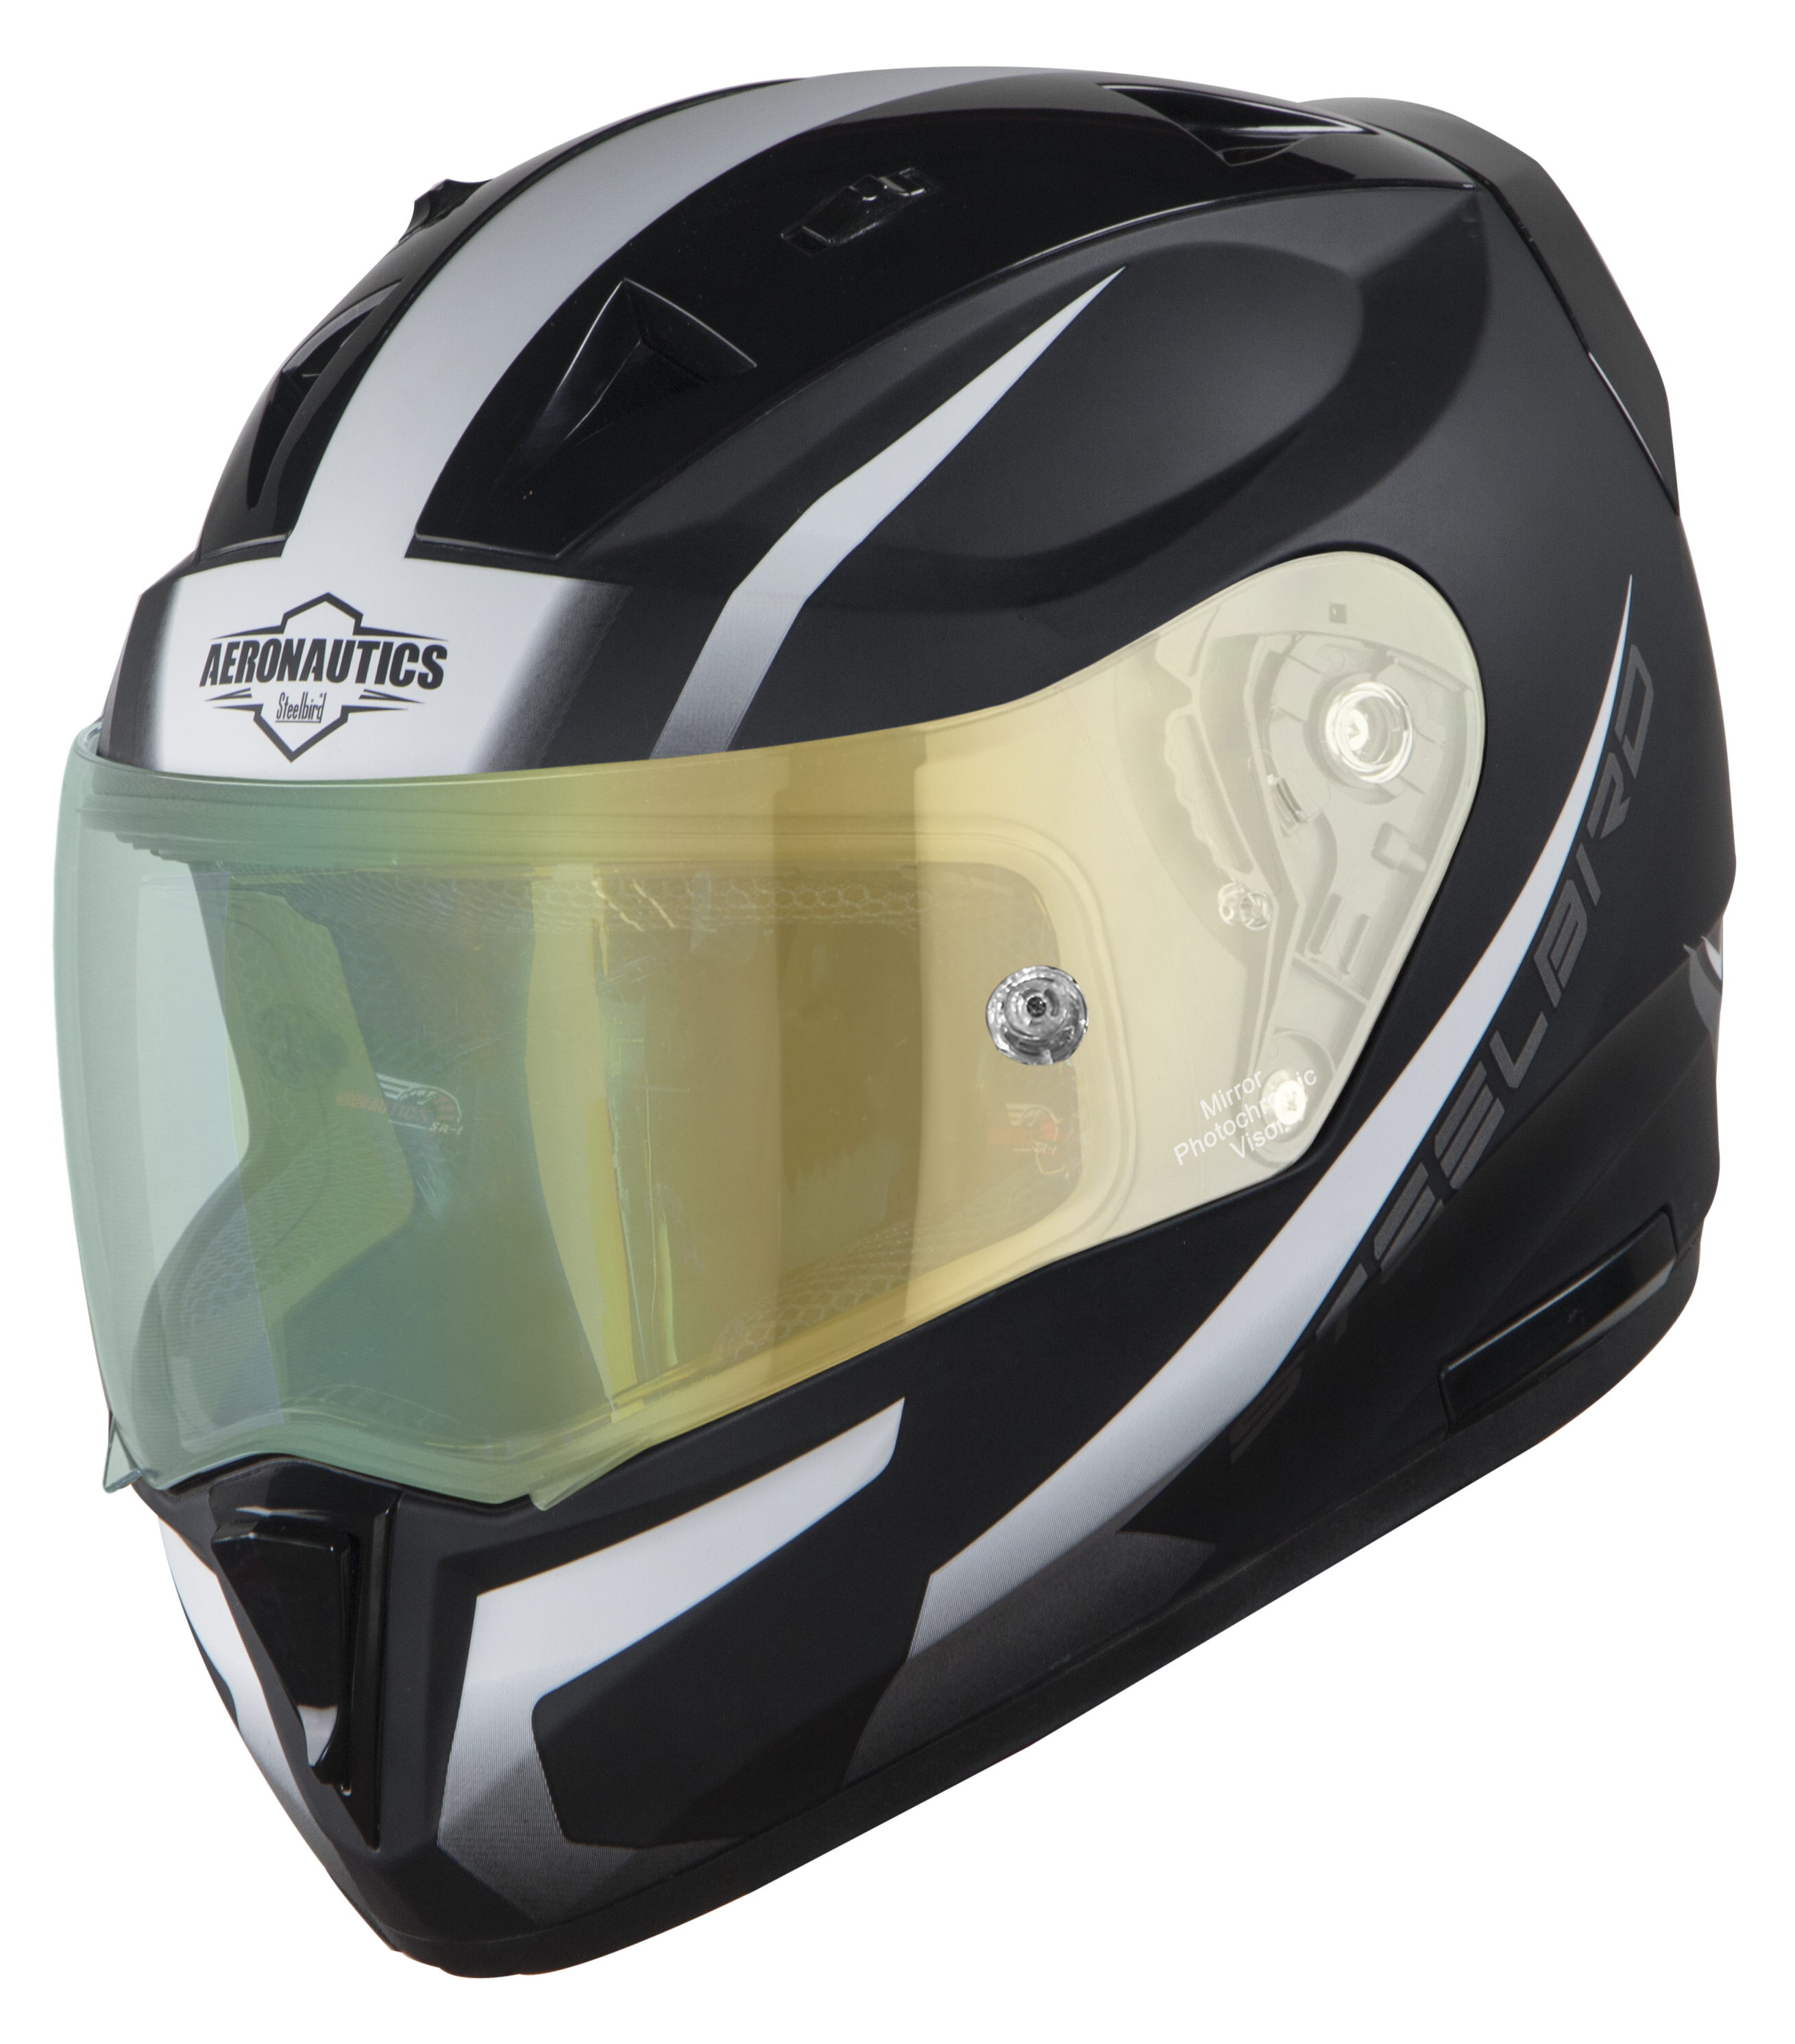 SA-1 WHIF Mat Black/White (Fitted With Clear Visor Extra Anti-Fog Shield Green Night Vision Photochromic Visor Free)